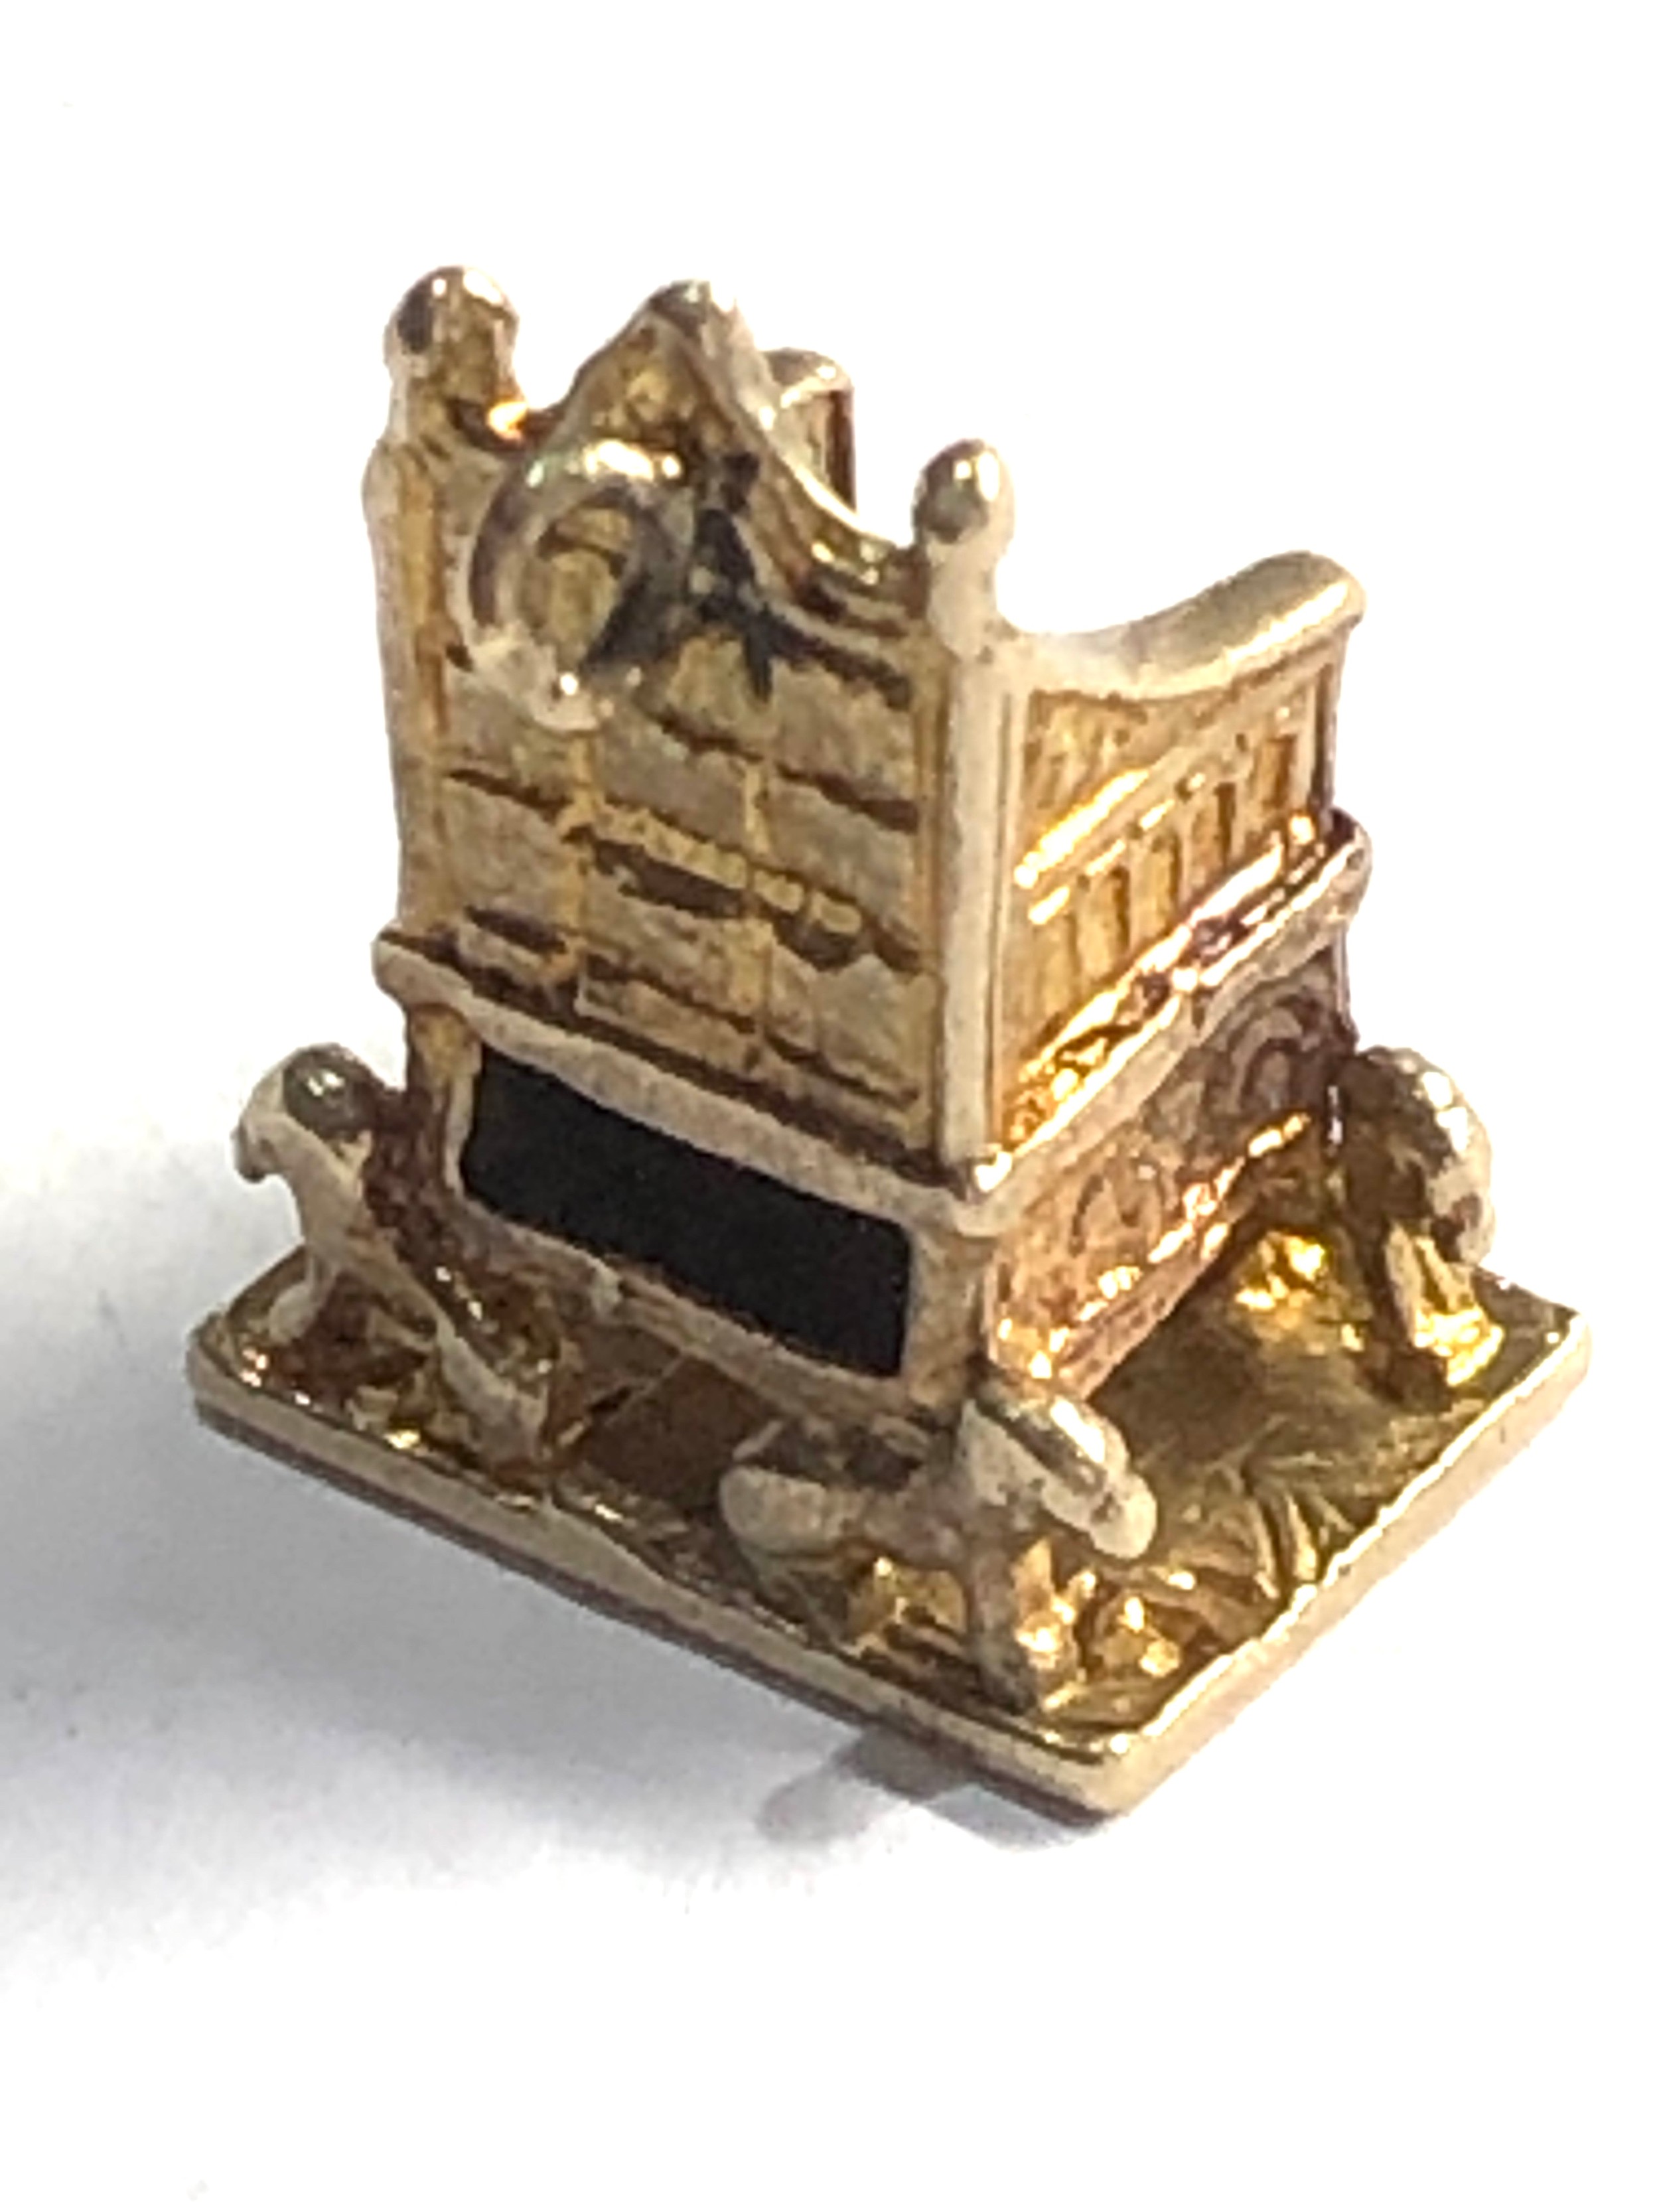 Vintage 9ct gold throne charm weight 3.1g - Image 2 of 2